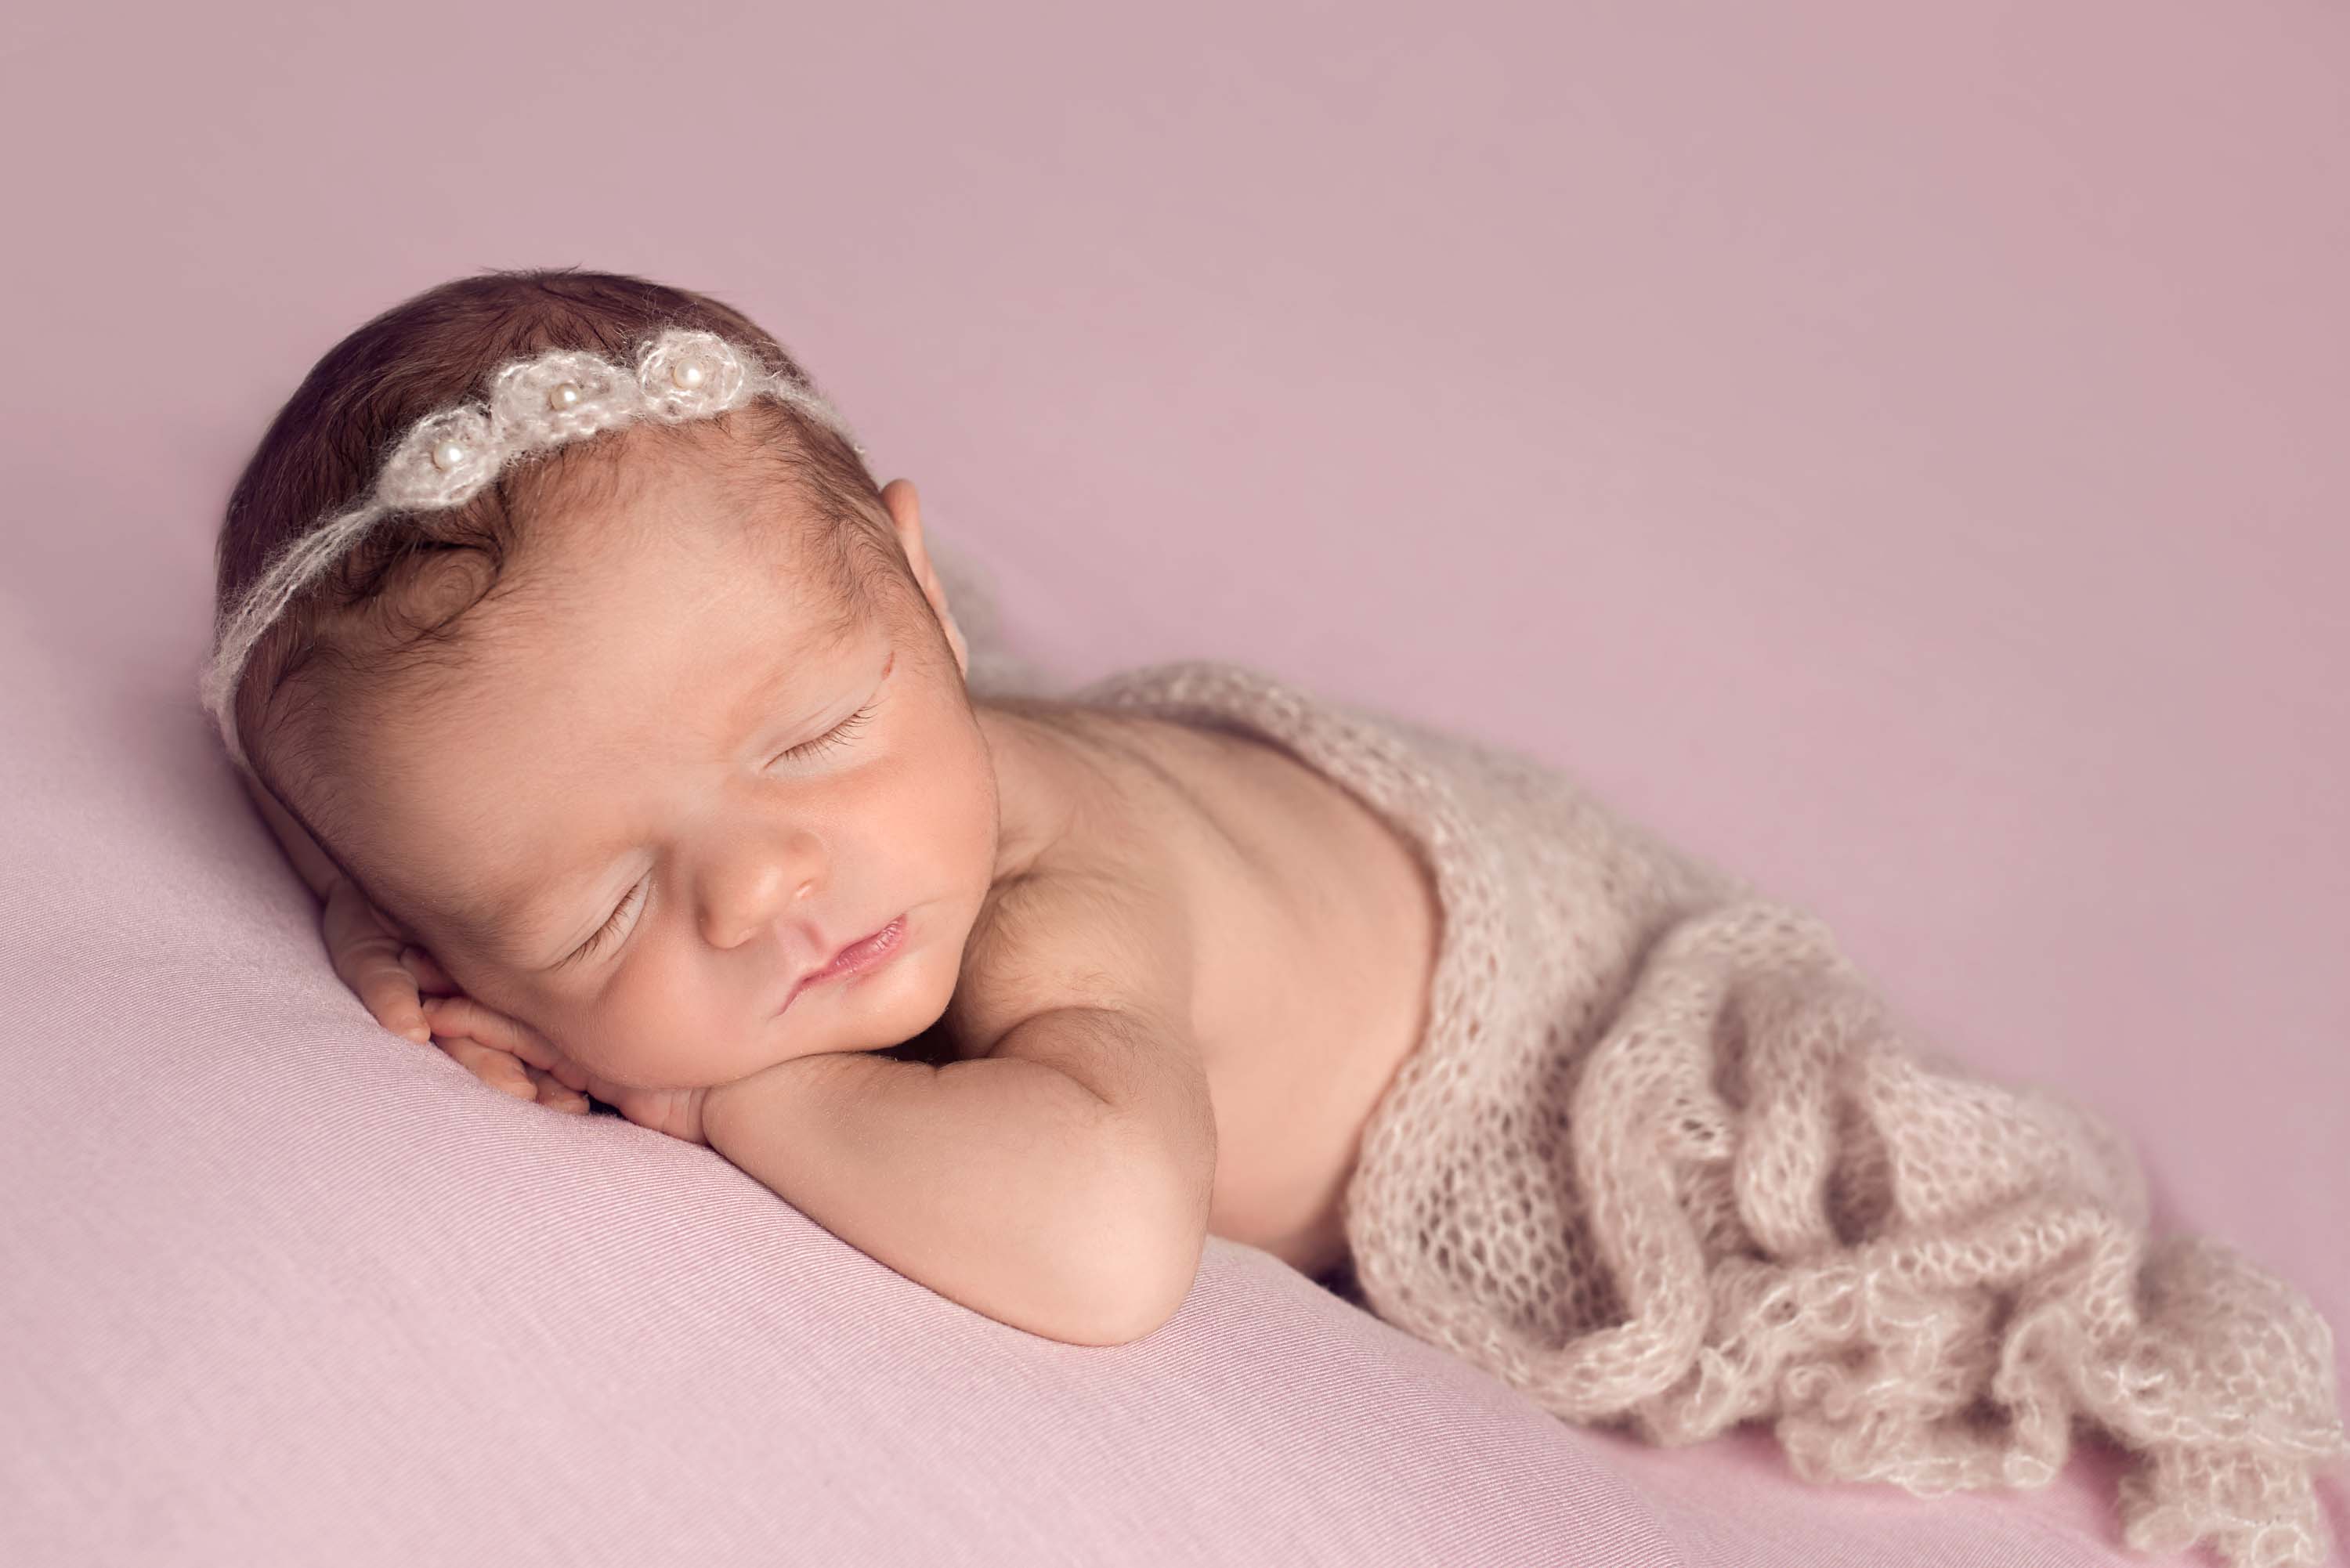 8 day old baby girl on pink blanket with dusty pink headband